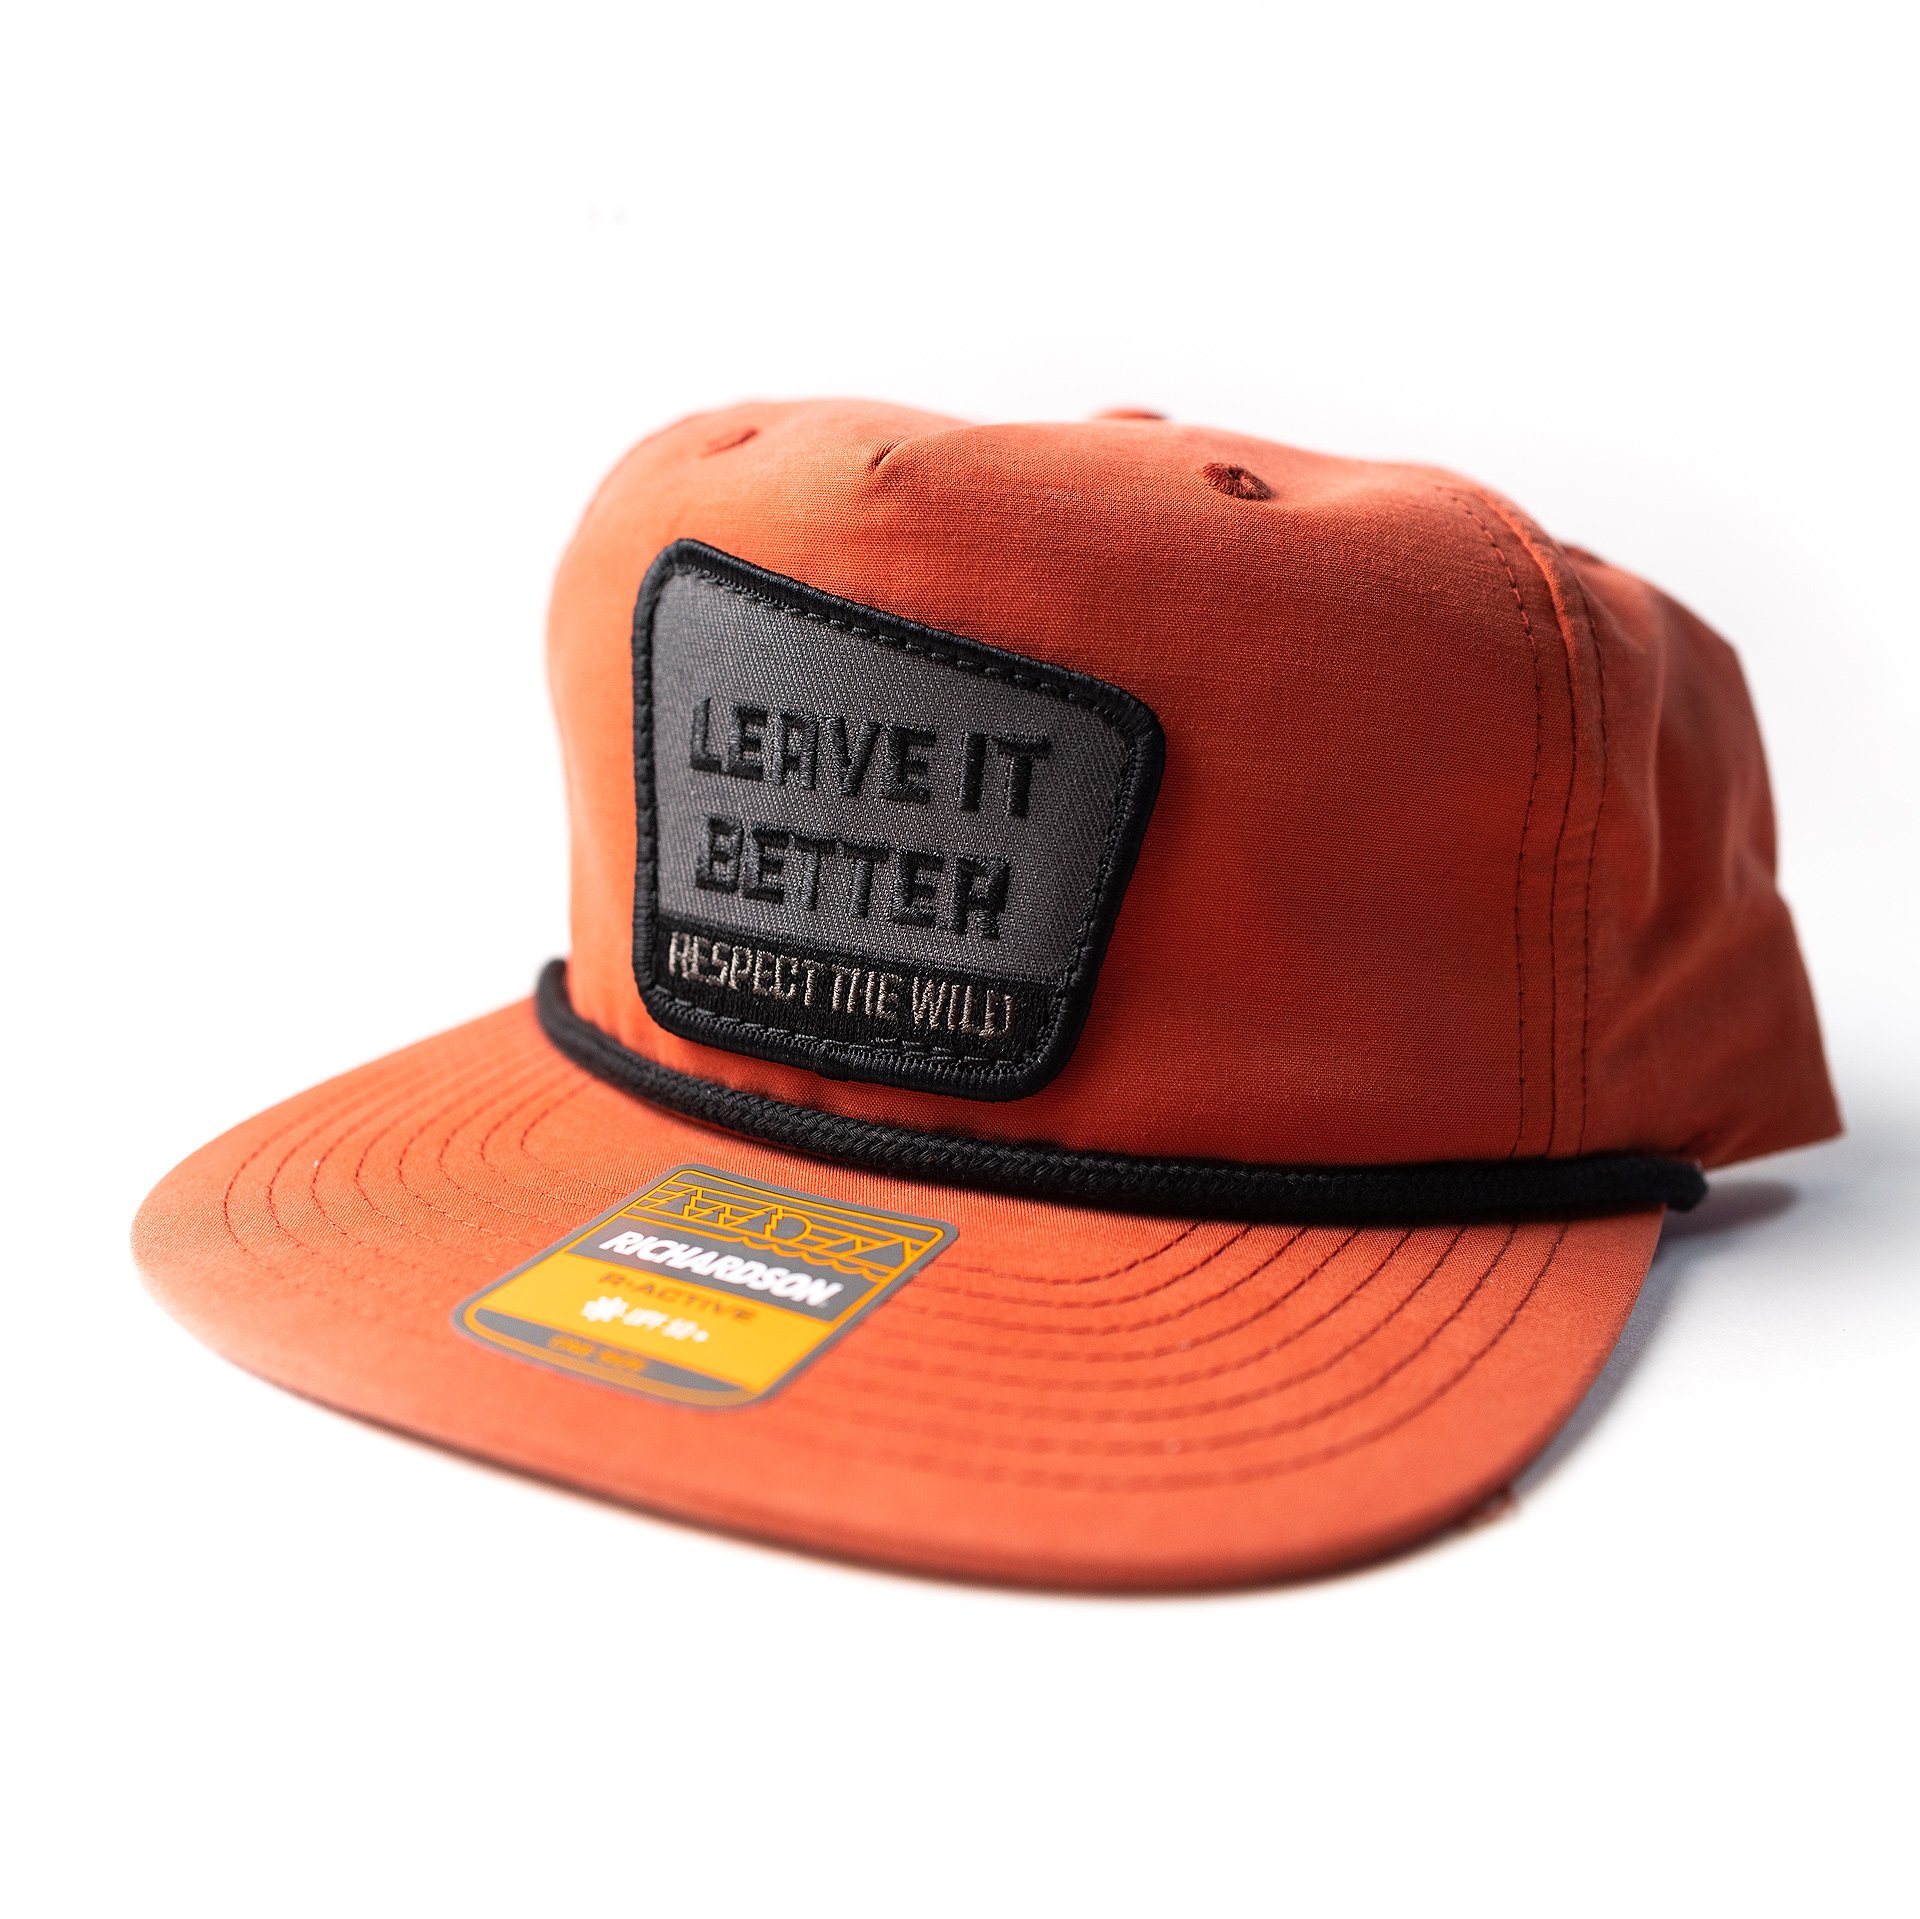 Nick - Better Page Photography Snapback Edition Orange it Limited Action — Leave